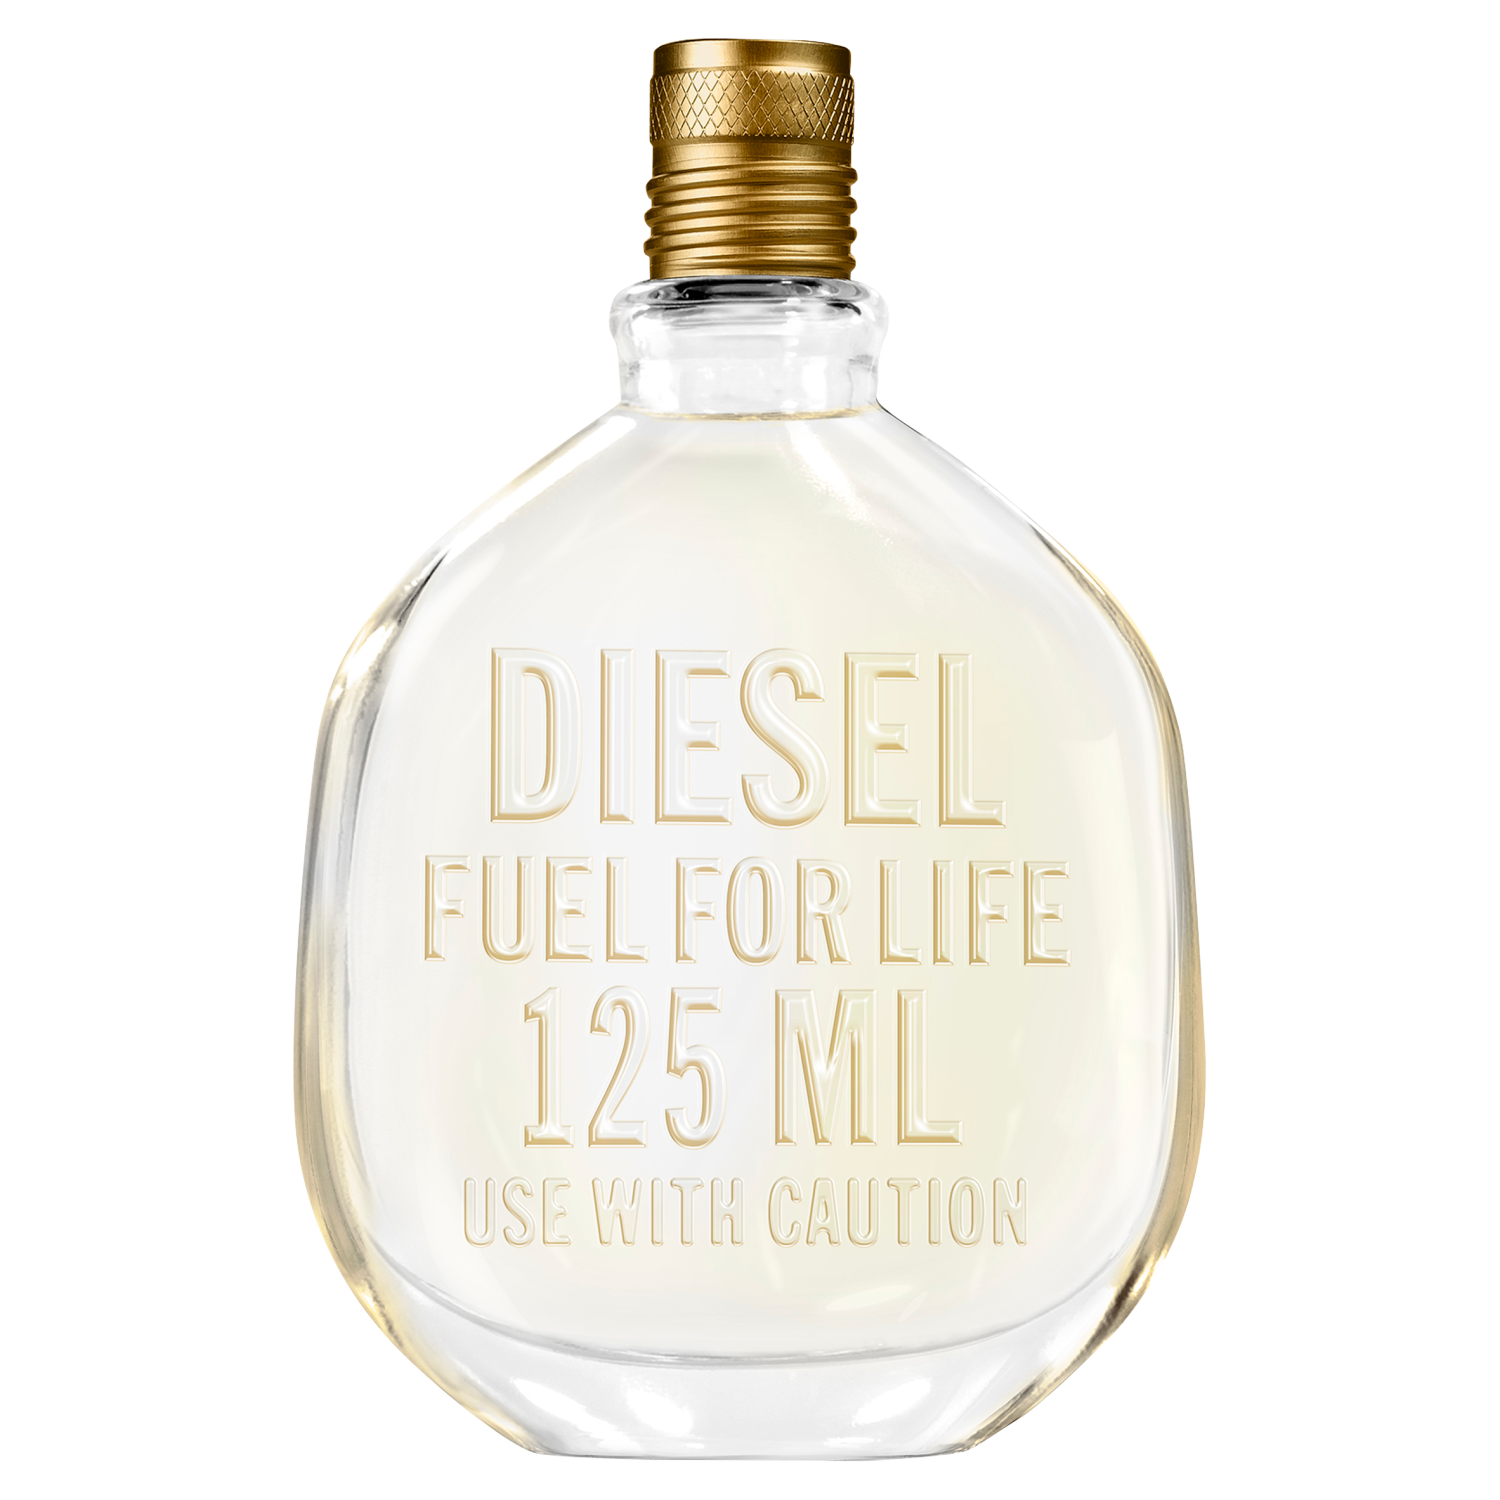 Мужская туалетная вода Diesel Fuel For Life Homme, 125 мл cdlla154s082 dlla157s067 dlla140s224 cdlla155s529 cdlla154sn080 dlla155s054 dlla154s304c5 diesel fuel injection nozzle for sale